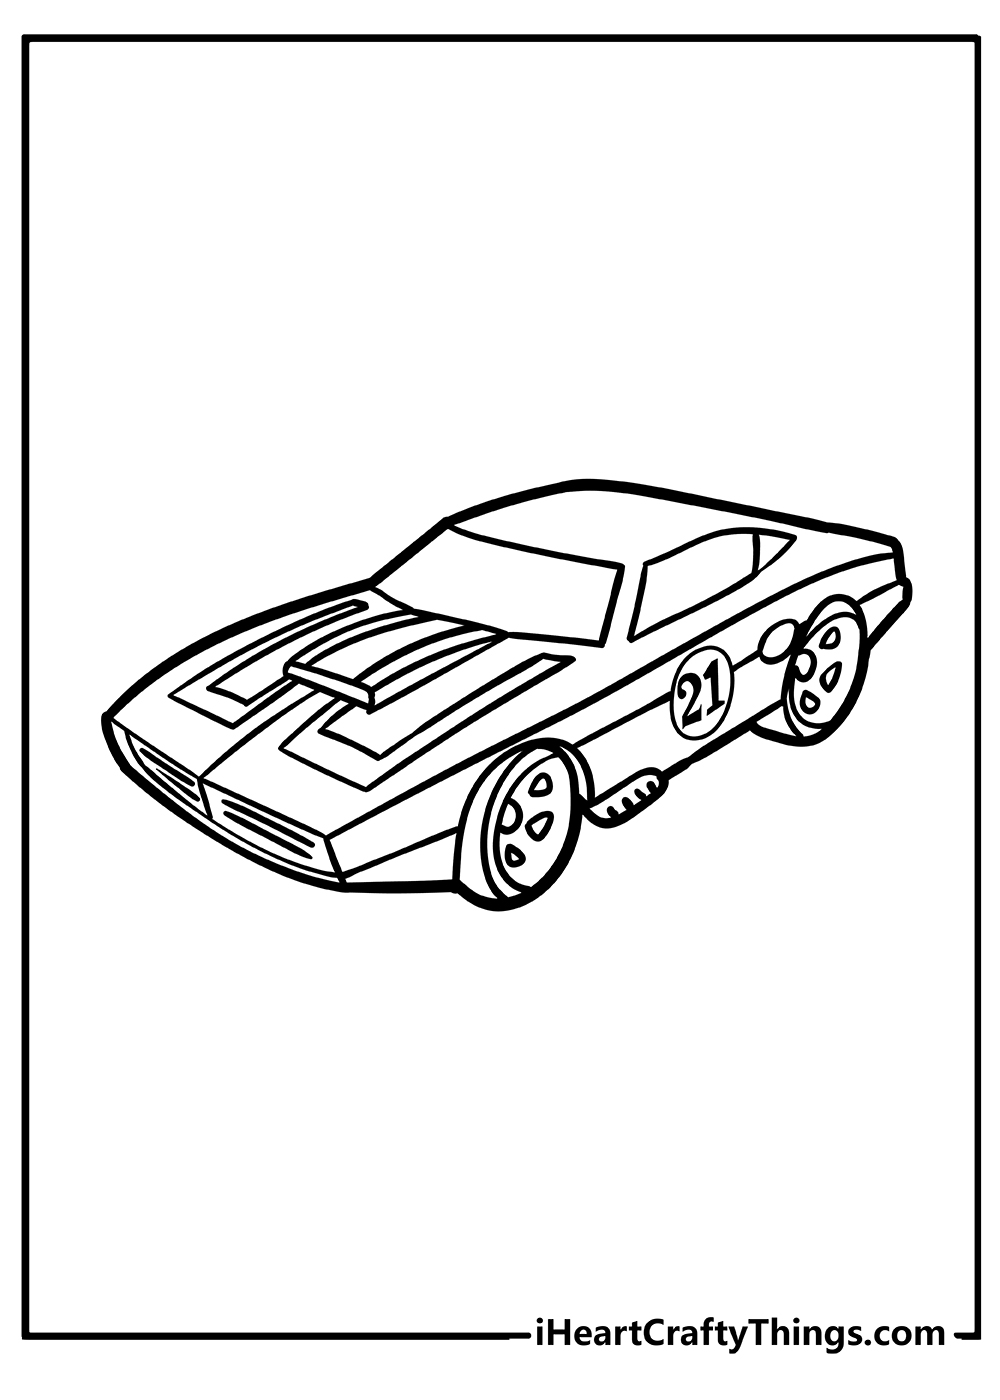 Hot Wheels Coloring Pages for kids free download